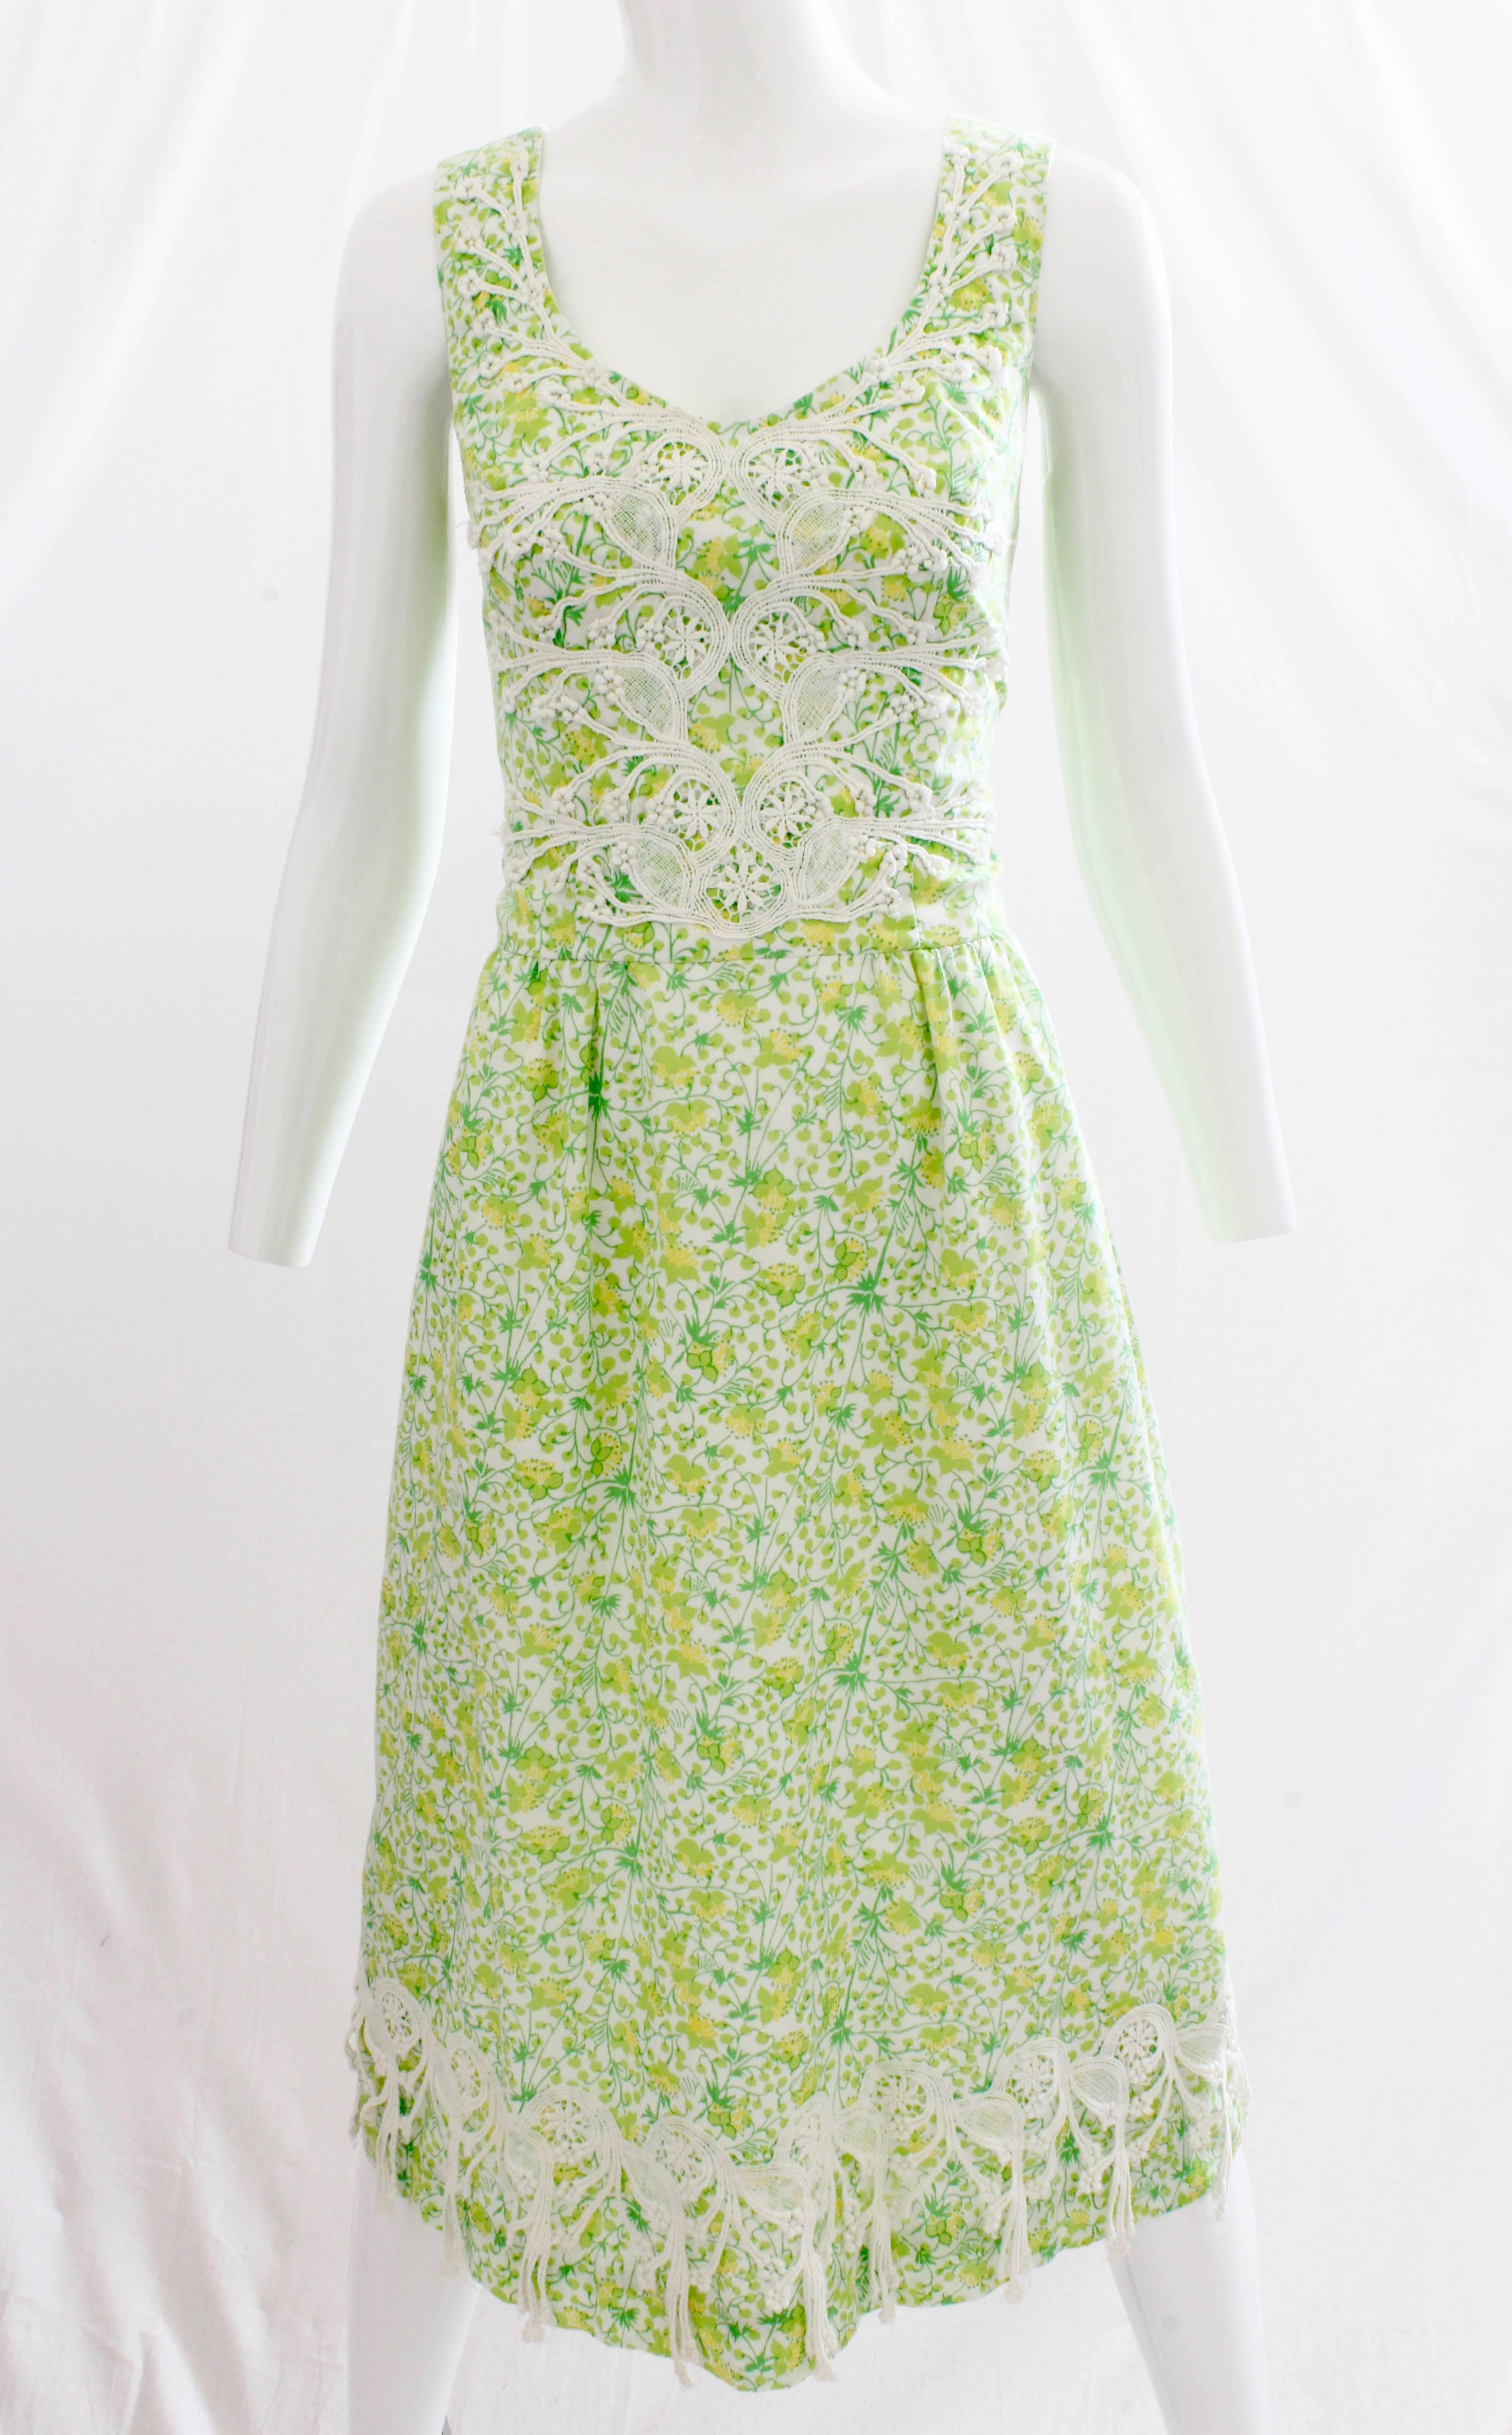 Women's 1970s Lilly Pulitzer Floral Print Dress with Lace Detailing Size 8/10